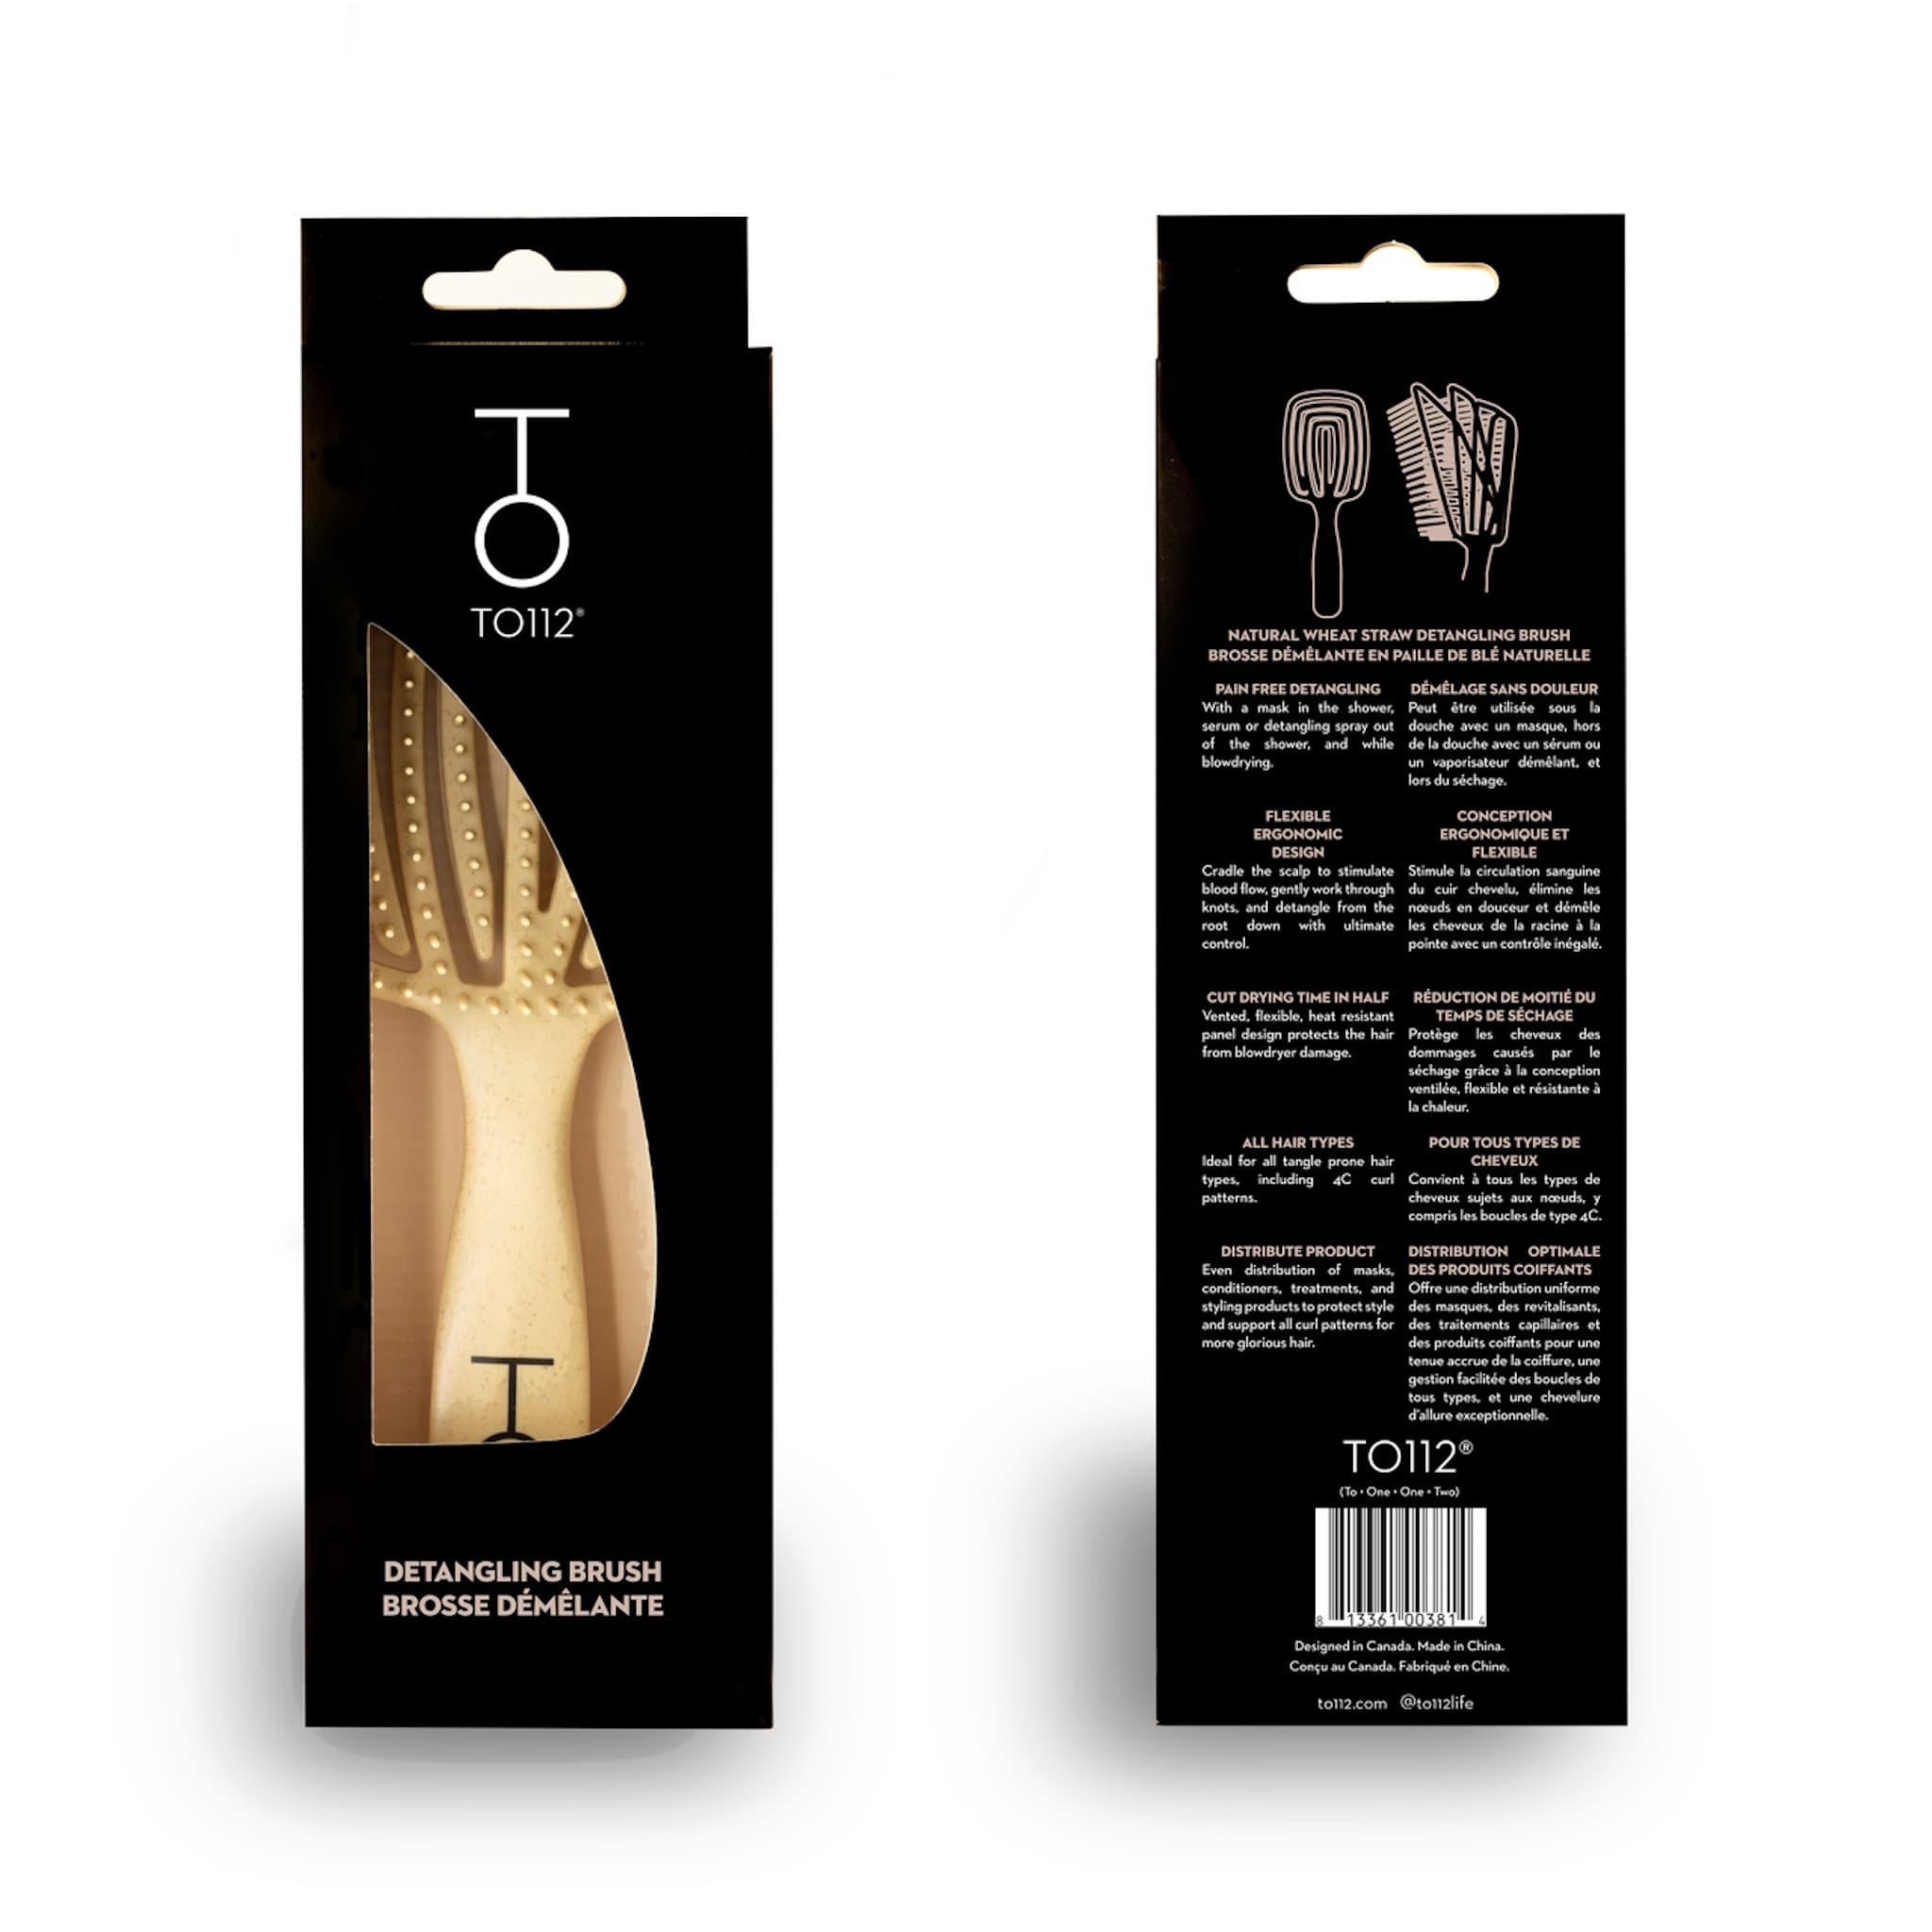 To112 Detangling Brush made with biodegradable wheat straw plastic in a recycled paper box - front and back box profile showing 5-way flex